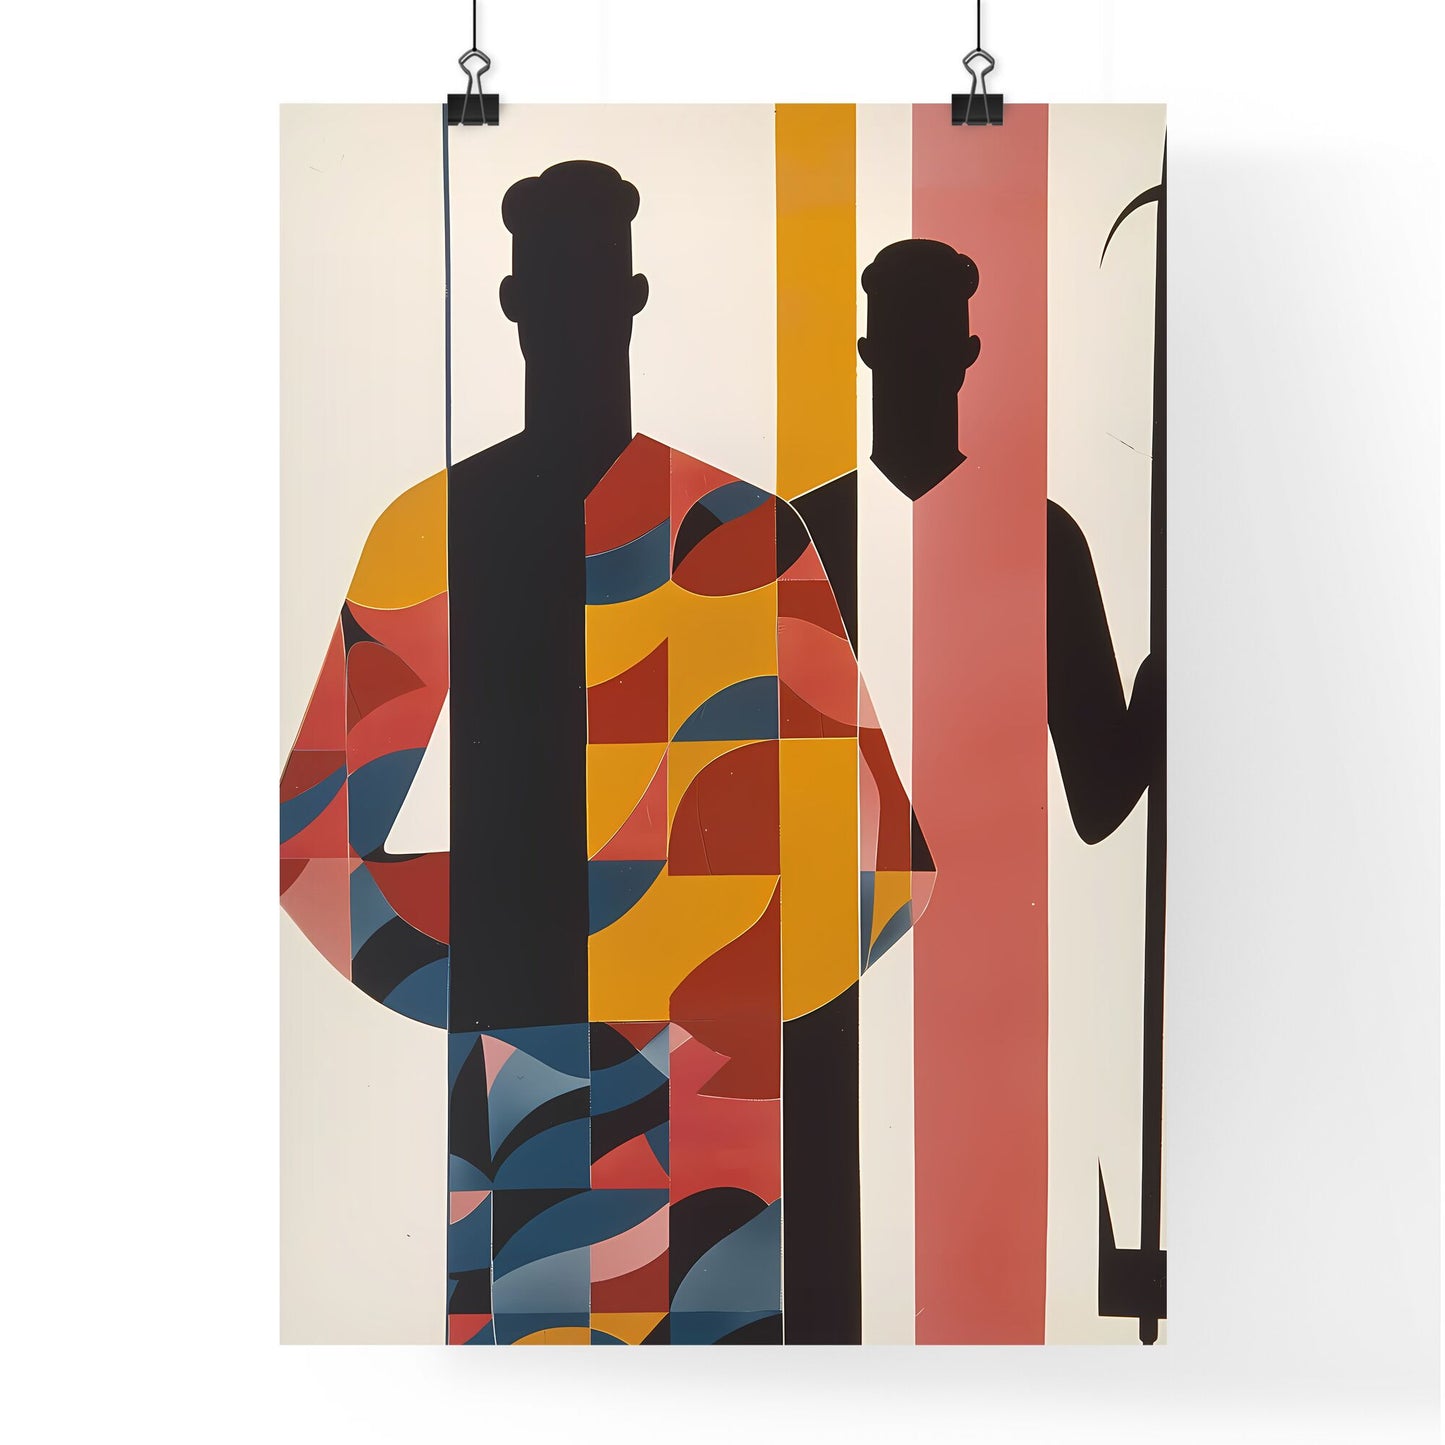 Bauhaus Inspired Painting: Geometric Men Holding Abstract Pitchfork in American Gothic Pose Default Title